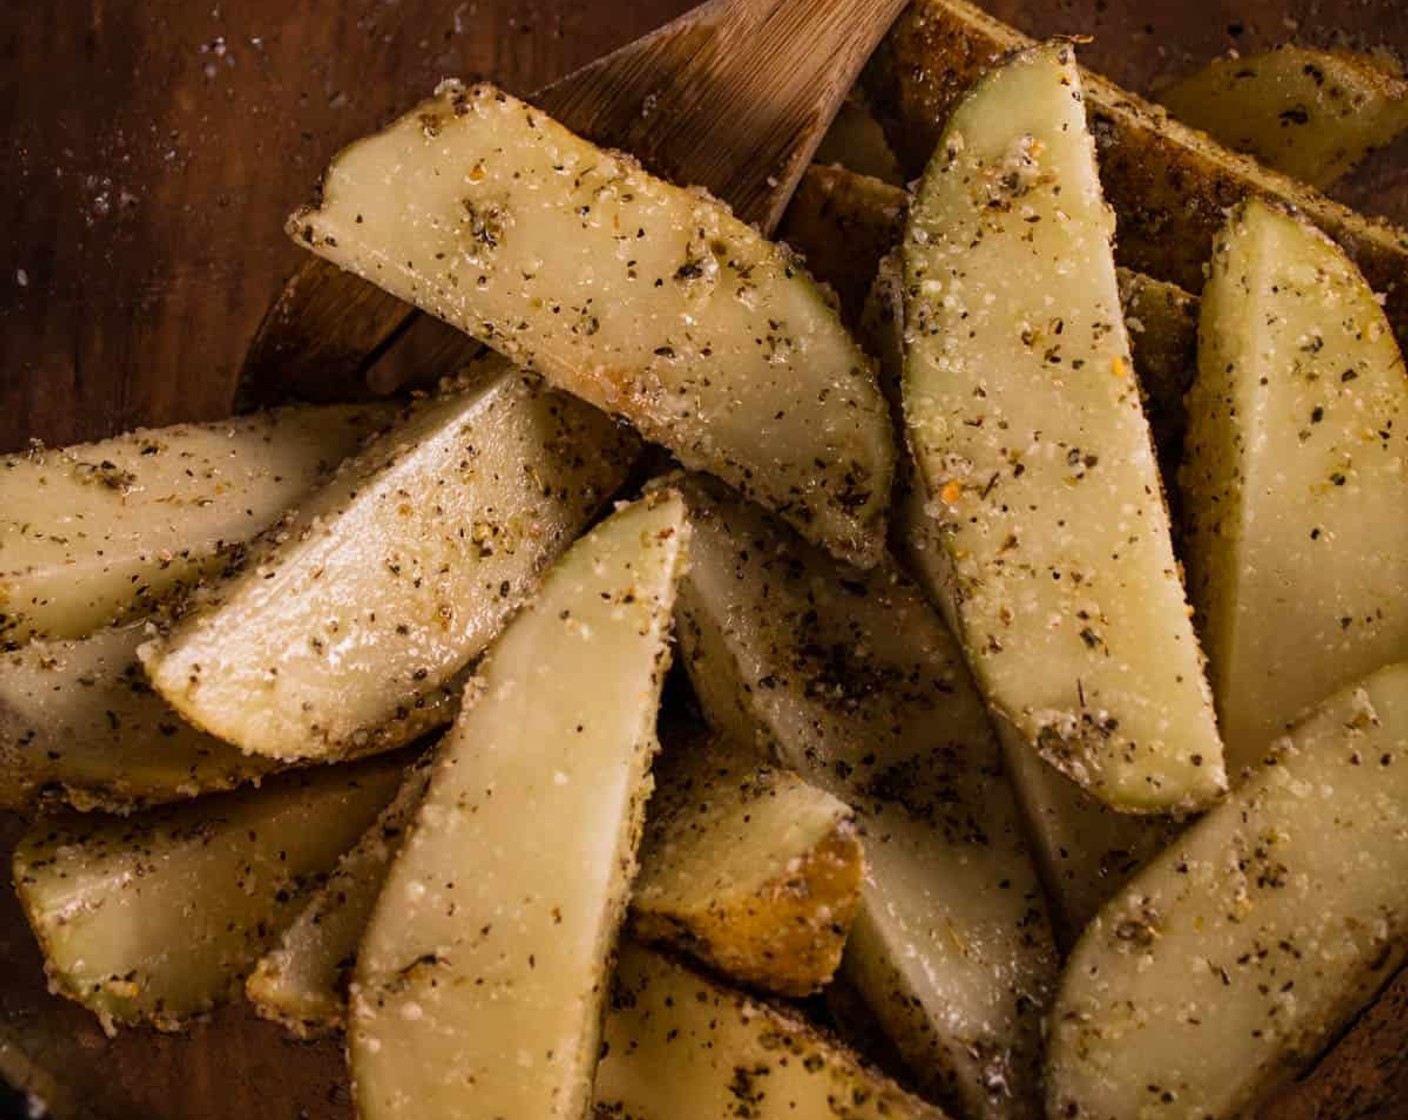 step 3 Place potato wedges in a large mixing bowl and add Olive Oil (1/4 cup), Grated Parmesan Cheese (1/4 cup), Italian Seasoning (1 Tbsp), McCormick® Garlic Powder (1 tsp), and Kosher Salt (1/2 tsp). Toss to combine until the olive oil and seasonings are well coated on all of the potato wedges.